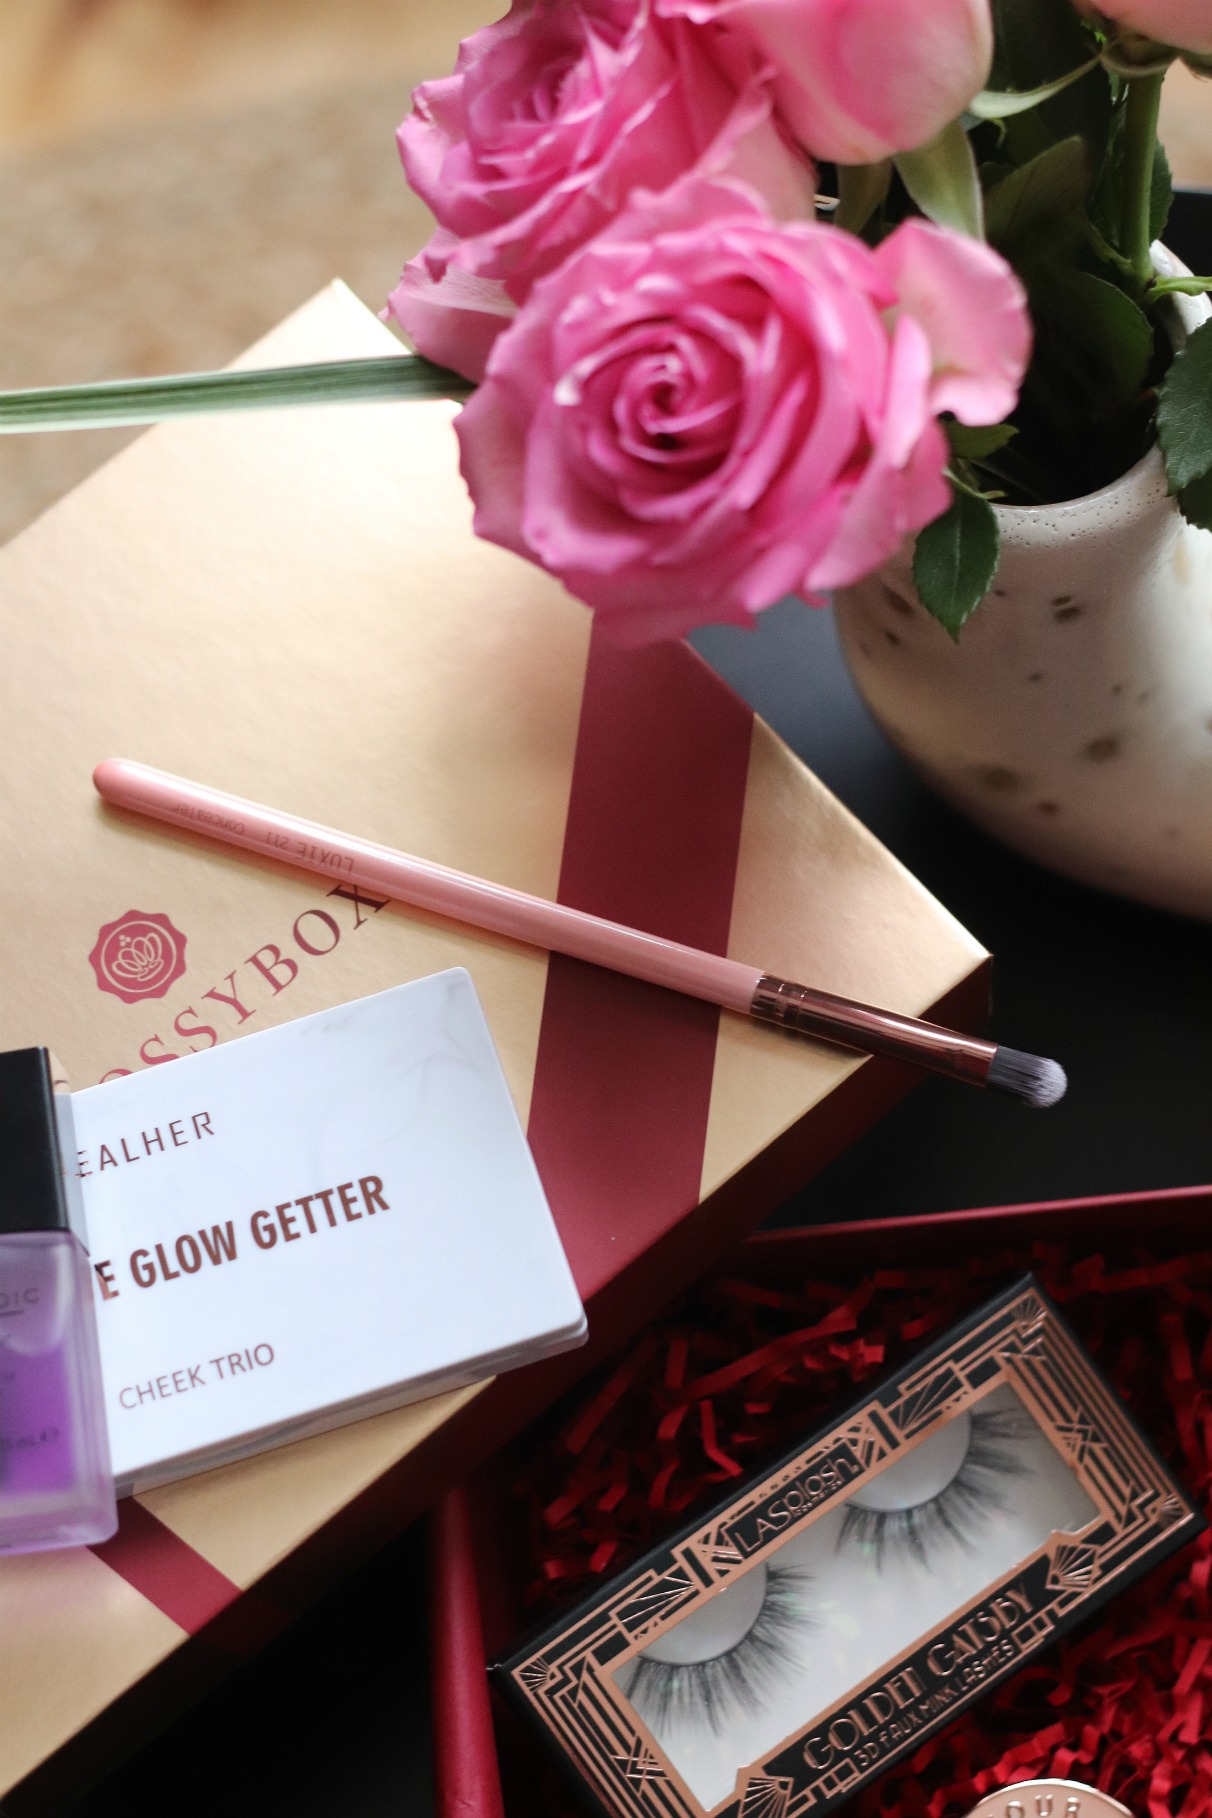 Glossybox December 2019 Luxie 211 makeup brush